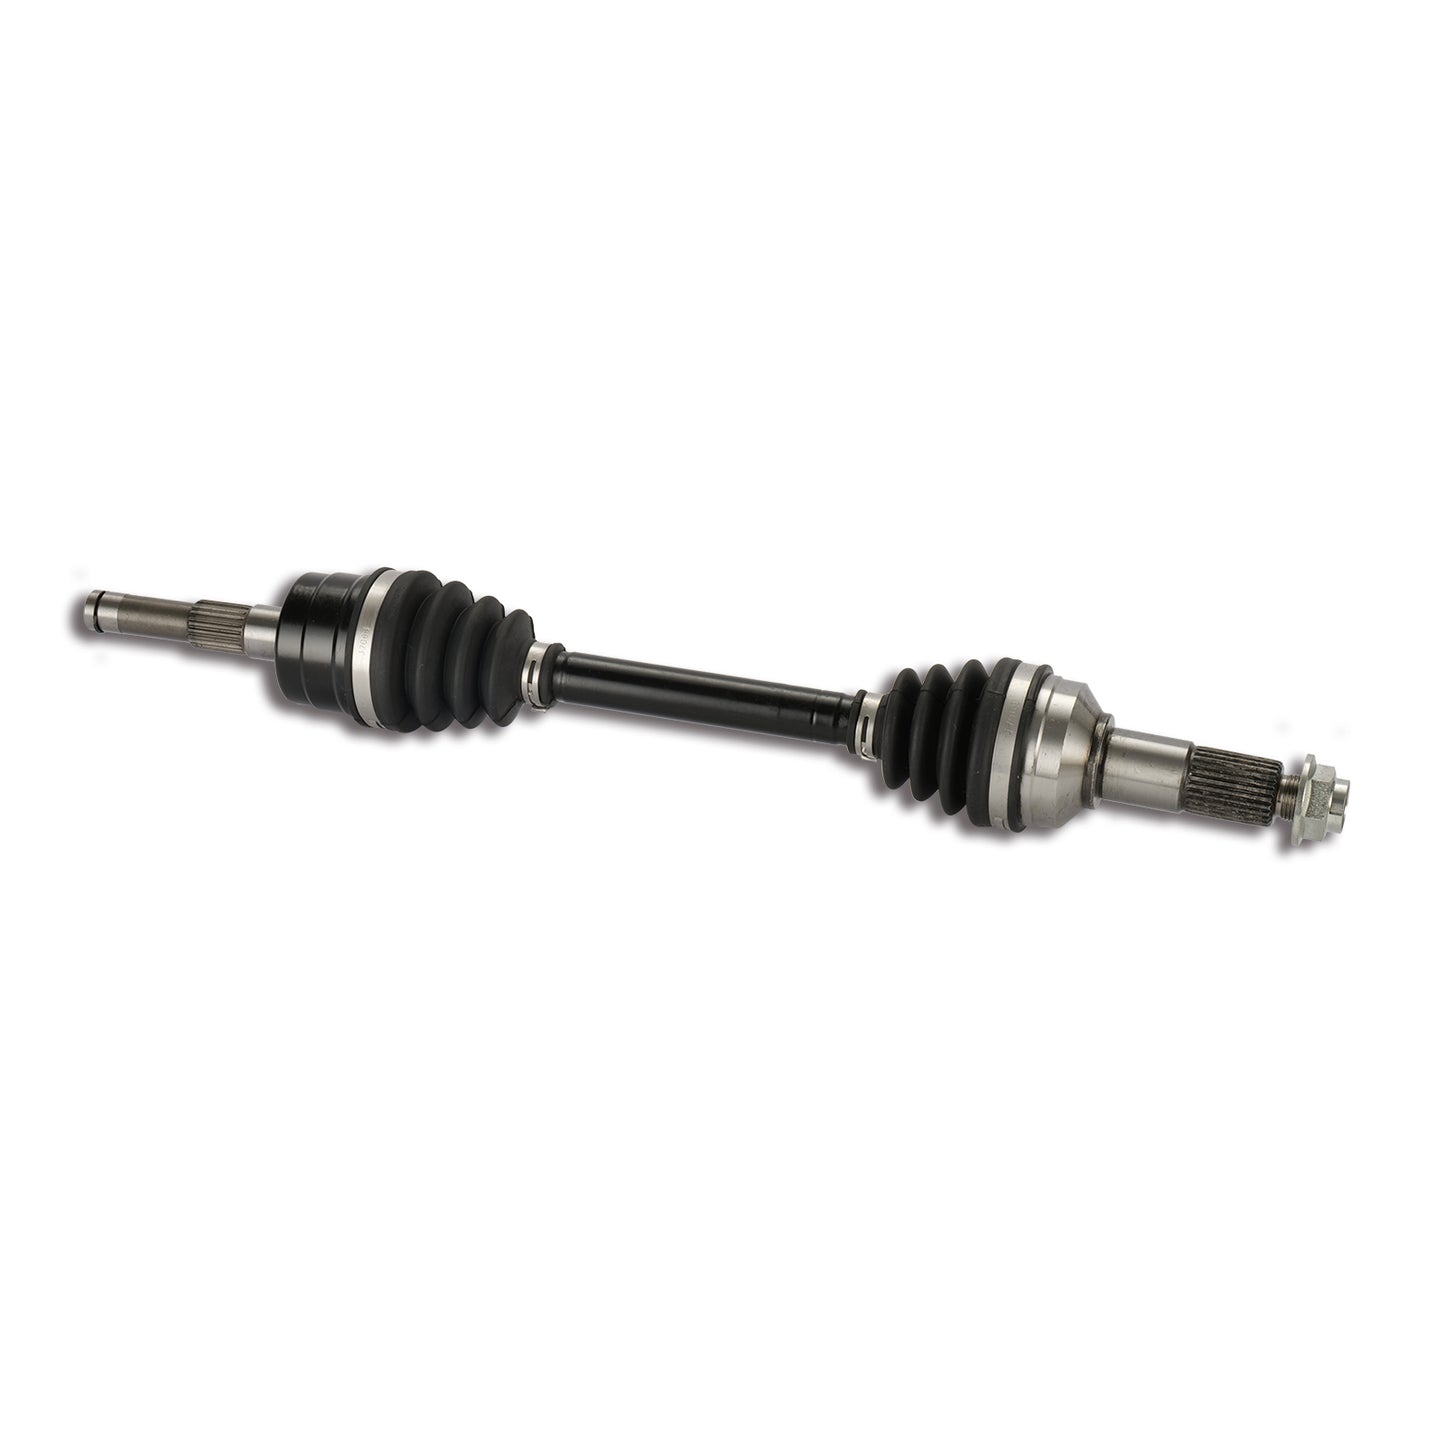 1 CAM-YA111 and 1 CAM-YA211 Front Left Drive Shaft CV Axle Compatible with YAMAHA (2003-2008) Grizzly 660 LF 5KM-2510J-30-00 5KM-2510F-11-00